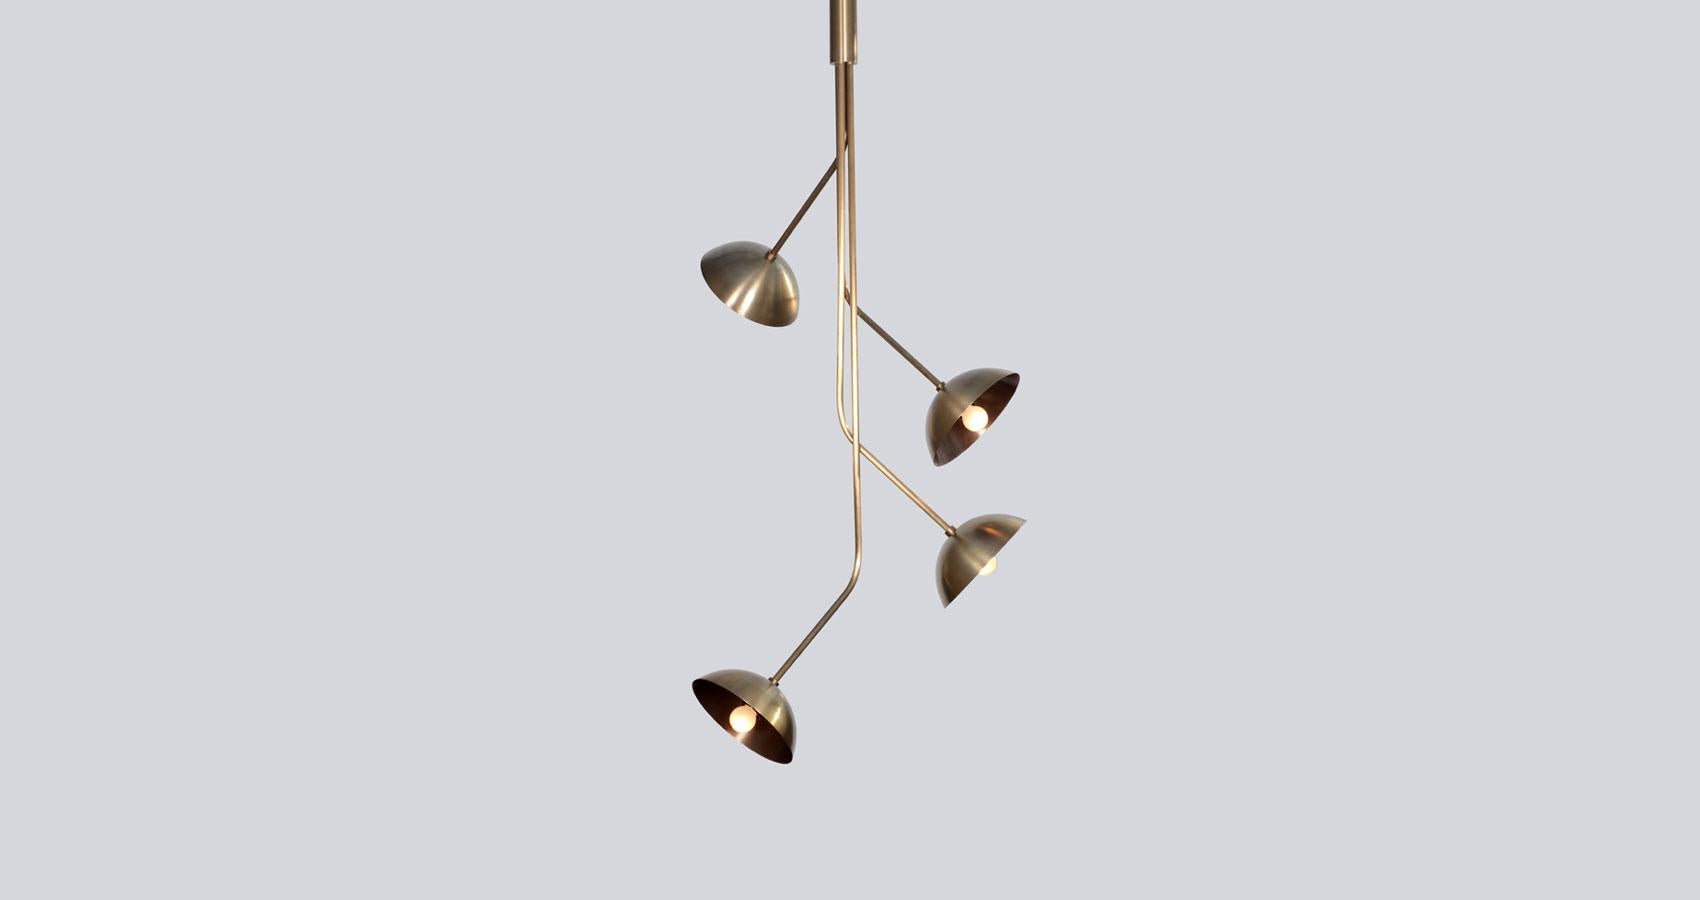 Rhythm 4 Brass Dome Pendant Lamp by Lamp Shaper
Dimensions: D 66 x W 66 x H 162.5 cm.
Materials: Brass.

Different finishes available: raw brass, aged brass, burnt brass and brushed brass Please contact us.

All our lamps can be wired according to